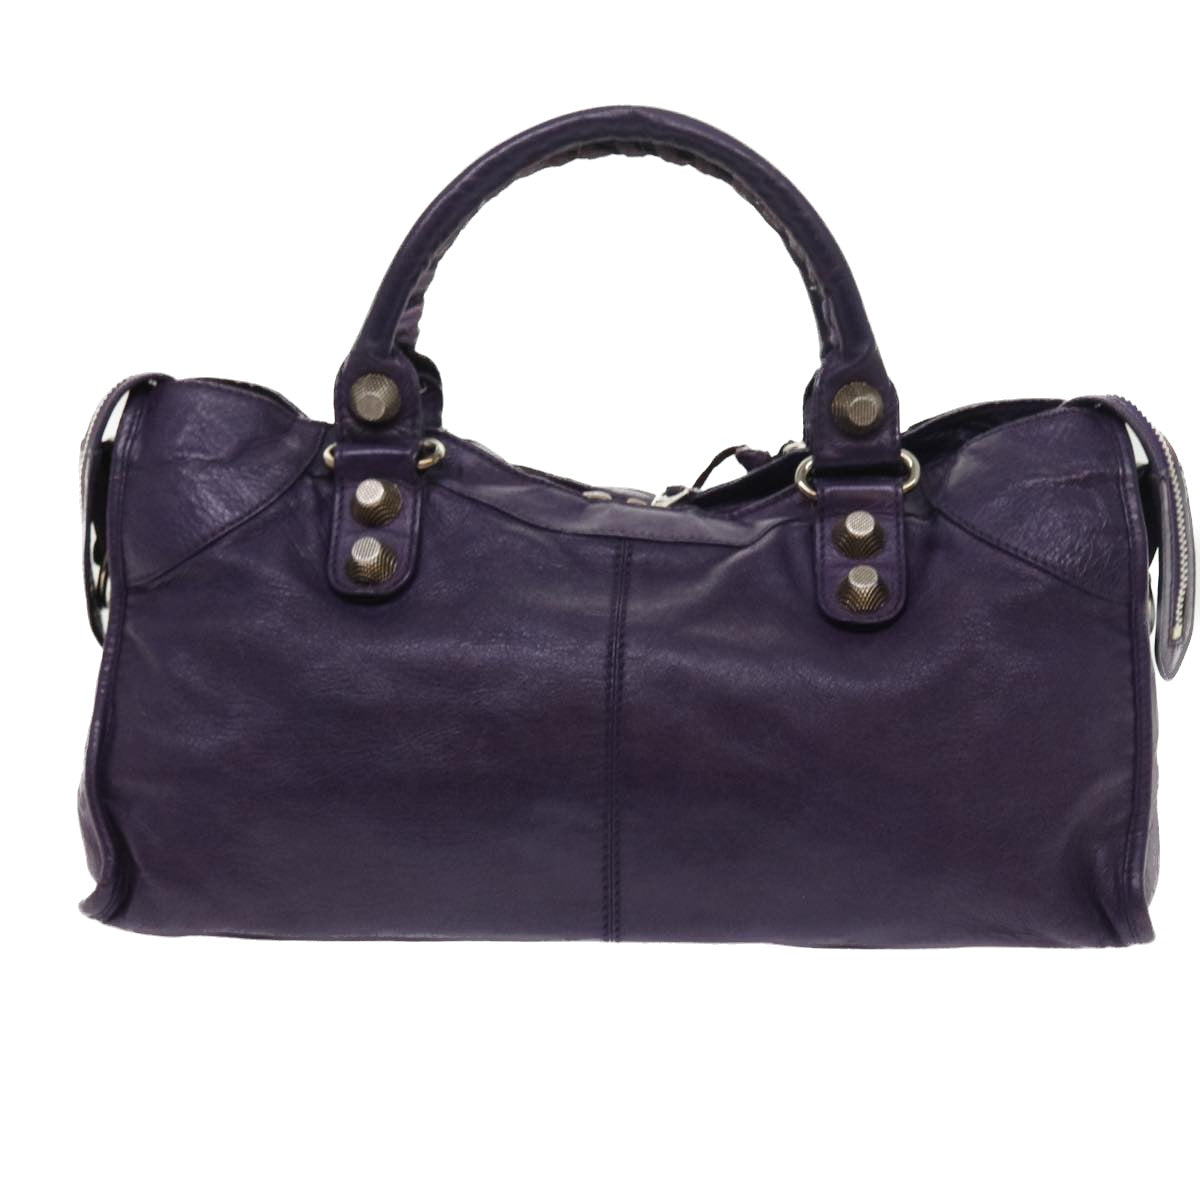 BALENCIAGA Part Time Giant Hand Bag Leather 2way Purple Auth 56666 - 0